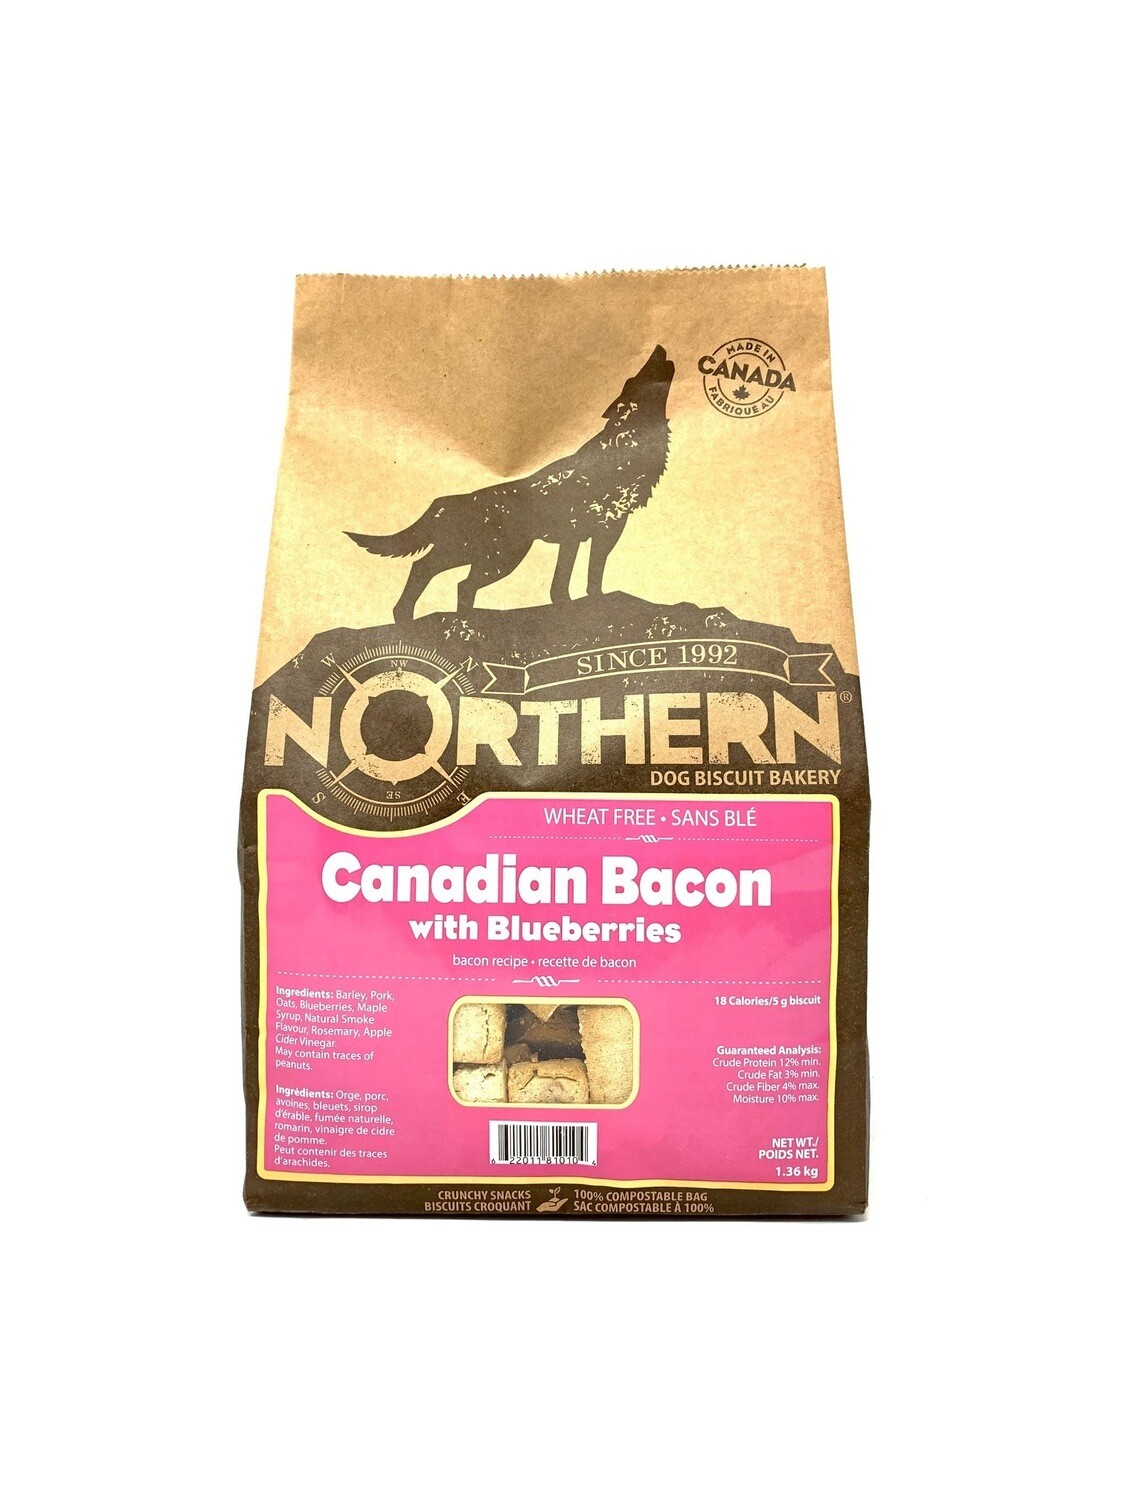 Northern Biscuit Canadian Bacon 1.36 kg